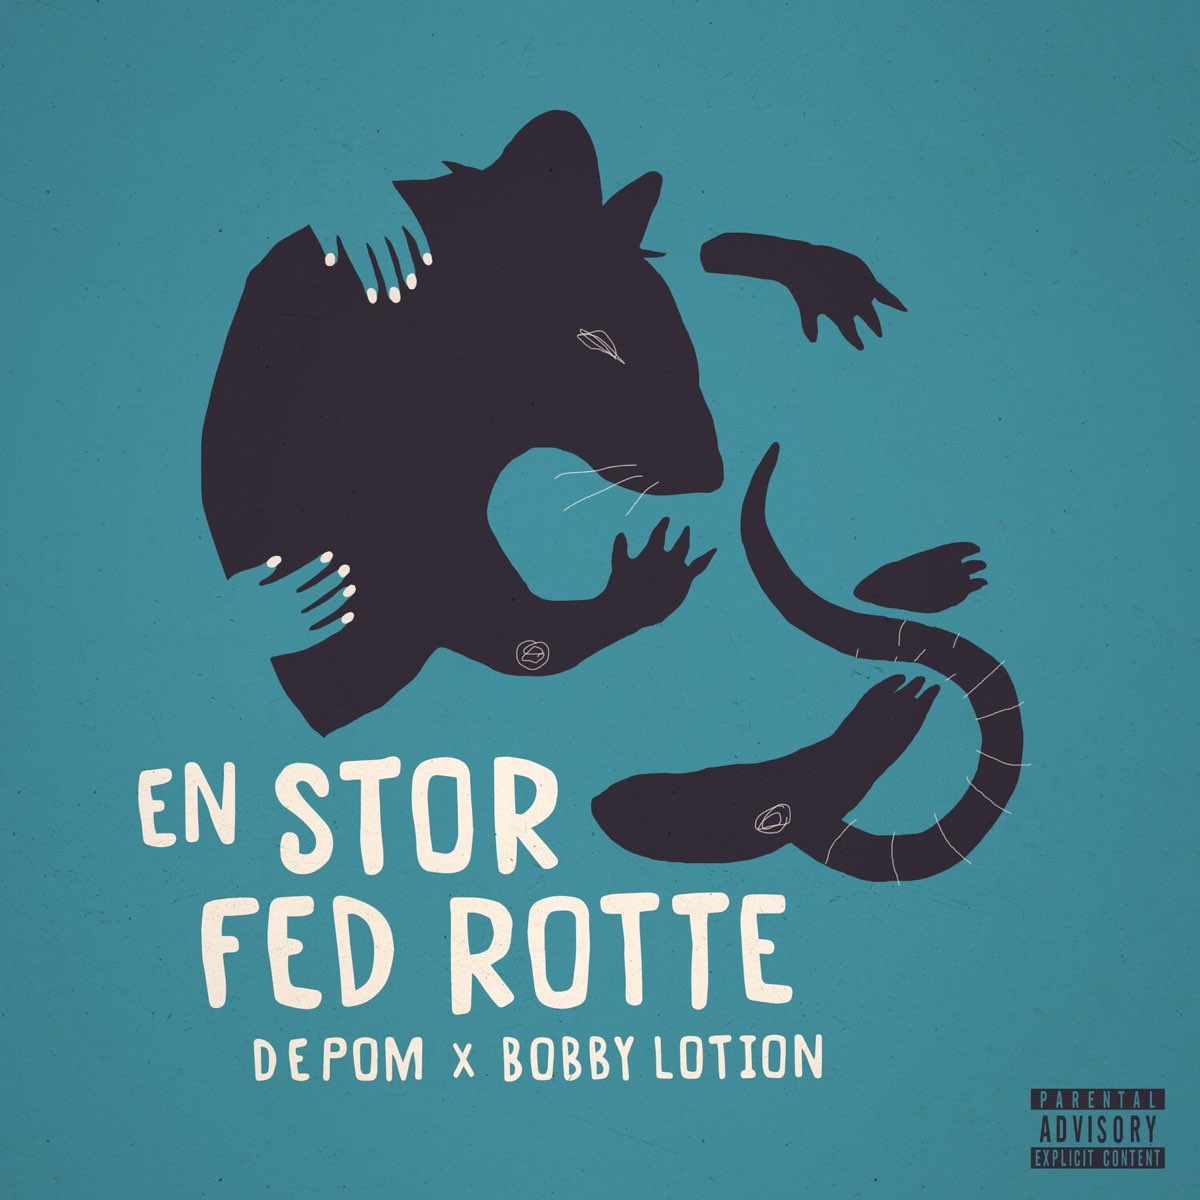 En stor fed rotte (feat. Bobby Lotion) - EP by D POM on Apple